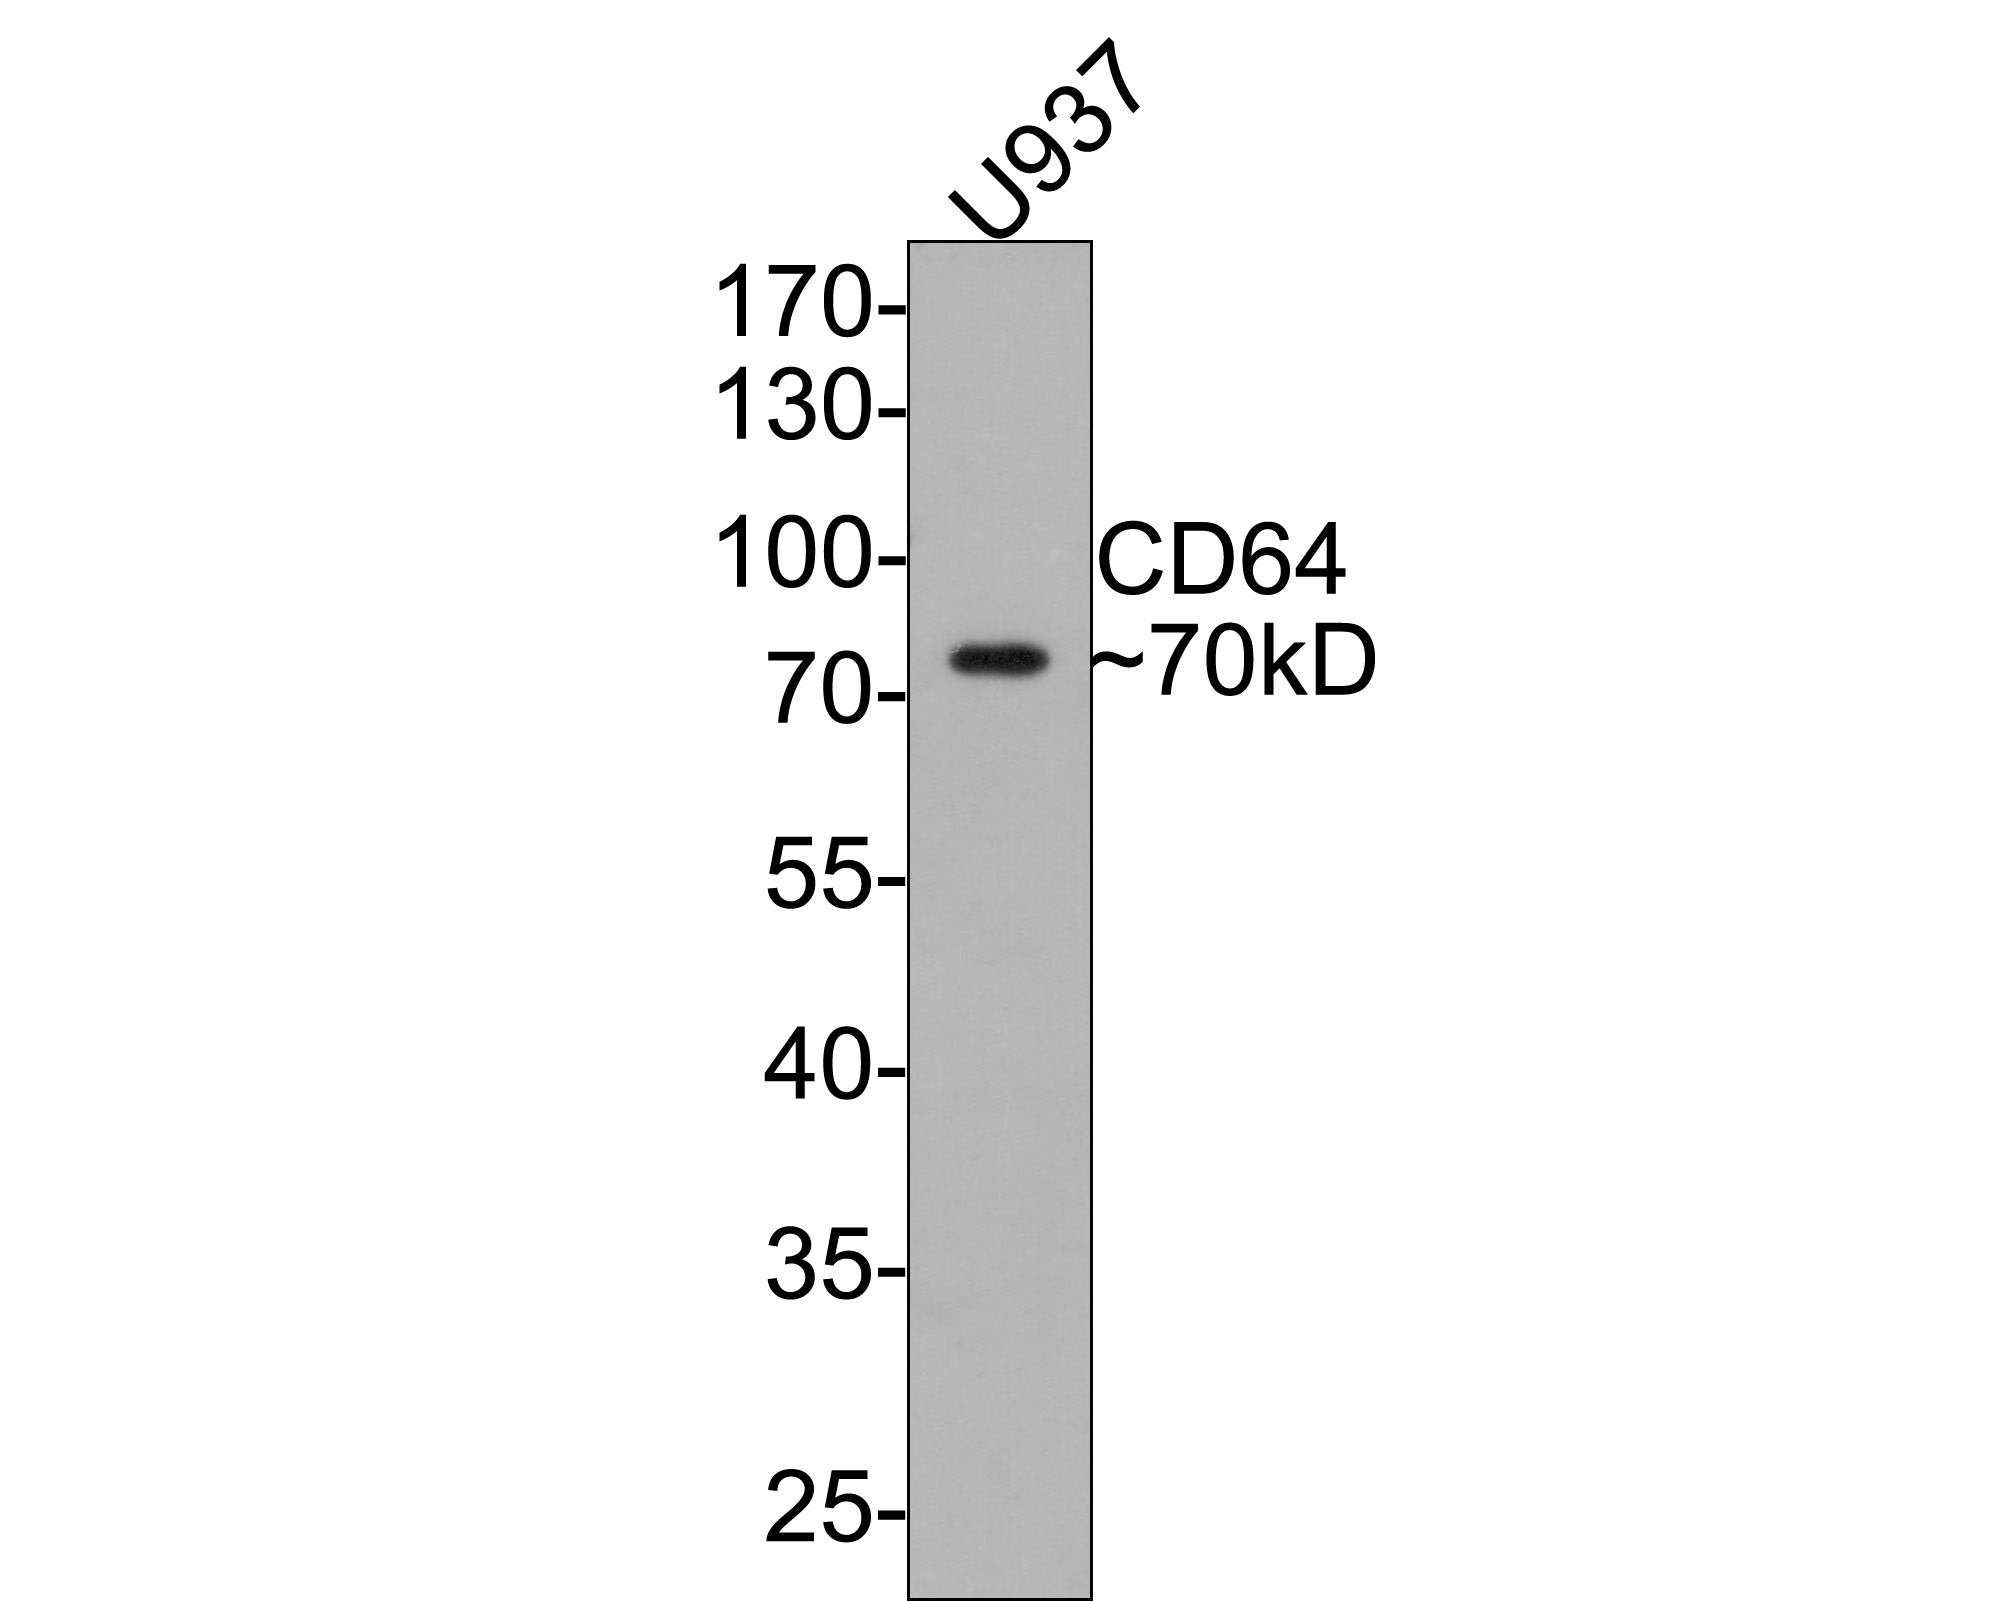 Western blot analysis of CD64 on U937 cell lysates with Mouse anti-CD64 antibody (HA601003) at 1/500 dilution.<br />
<br />
Lysates/proteins at 10 µg/Lane.<br />
<br />
Predicted band size: 43 kDa<br />
Observed band size: 70 kDa<br />
<br />
Exposure time: 1 minute;<br />
<br />
10% SDS-PAGE gel.<br />
<br />
Proteins were transferred to a PVDF membrane and blocked with 5% NFDM/TBST for 1 hour at room temperature. The primary antibody (HA601003) at 1/500 dilution was used in 5% NFDM/TBST at room temperature for 2 hours. Goat Anti-Mouse IgG - HRP Secondary Antibody (HA1006) at 1:100,000 dilution was used for 1 hour at room temperature.